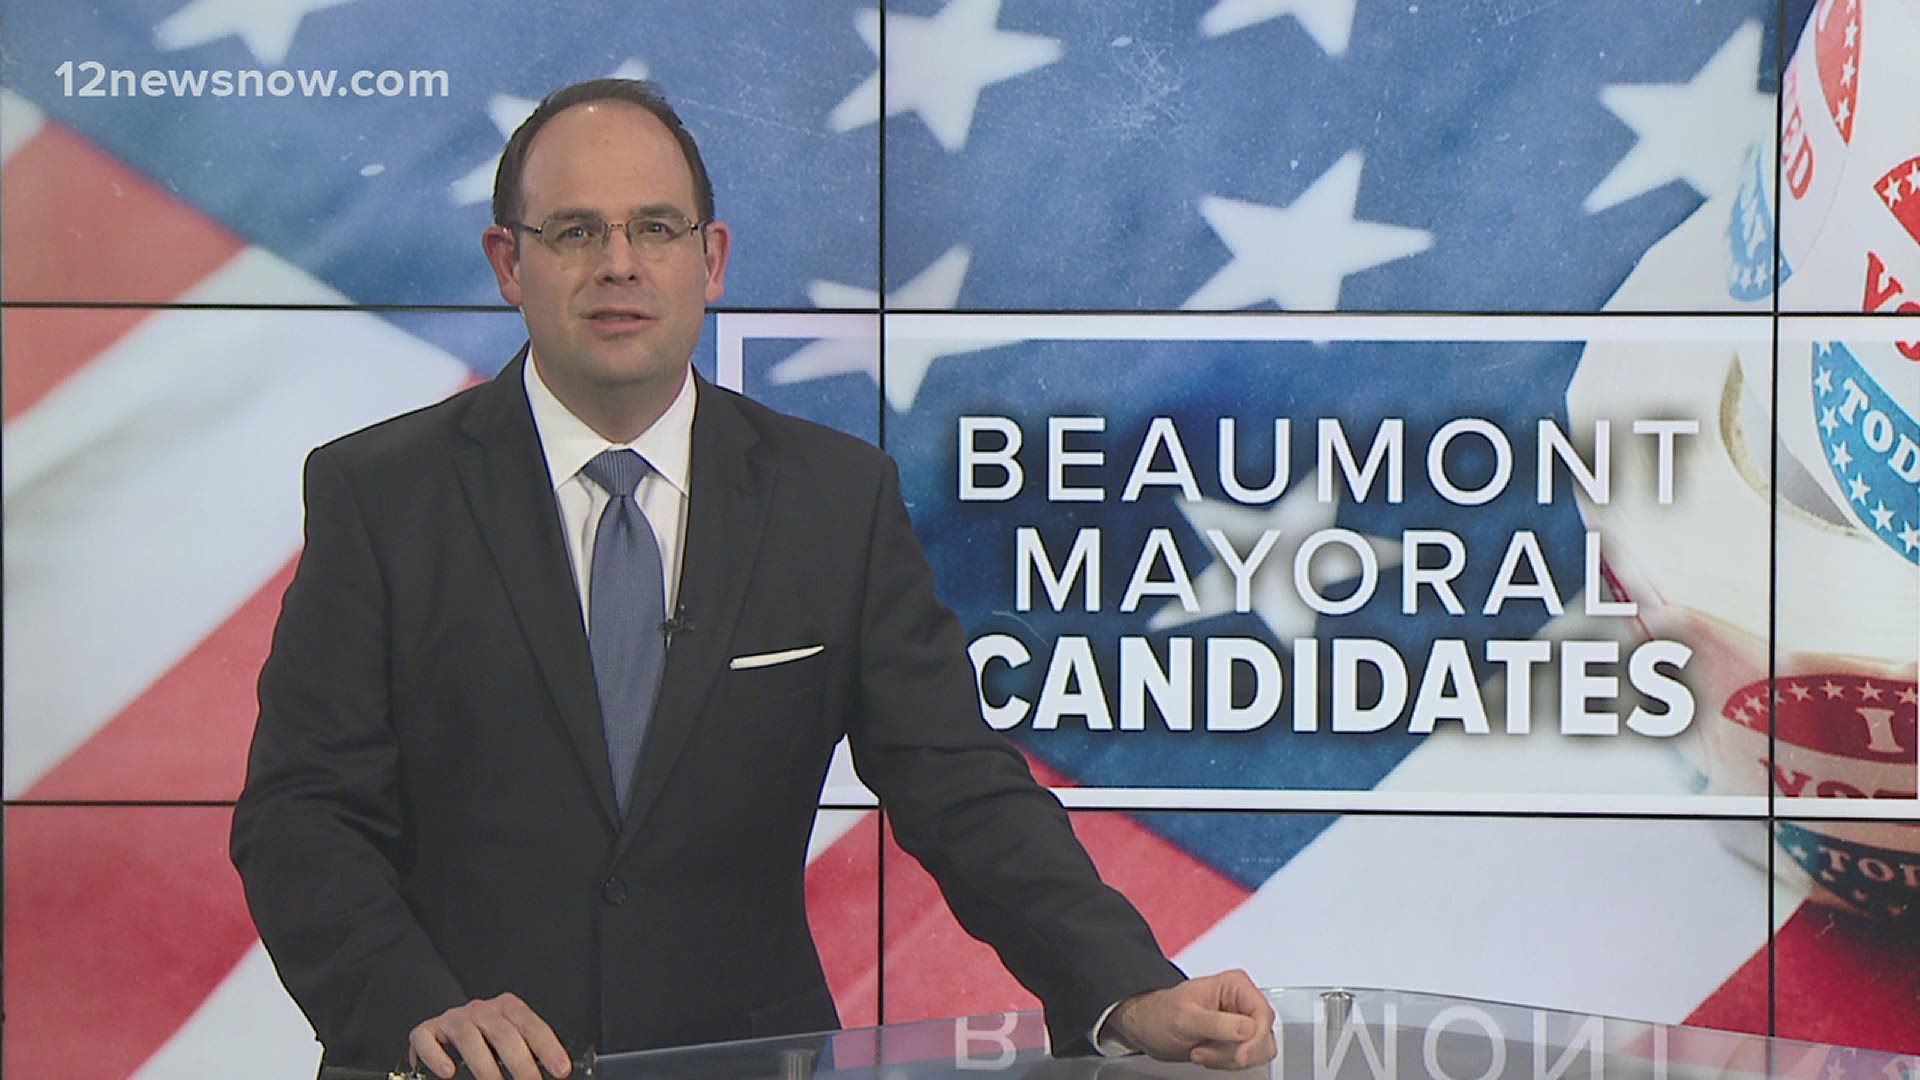 Beaumont voters now have 5 candidates to choose from for the upcoming May election.